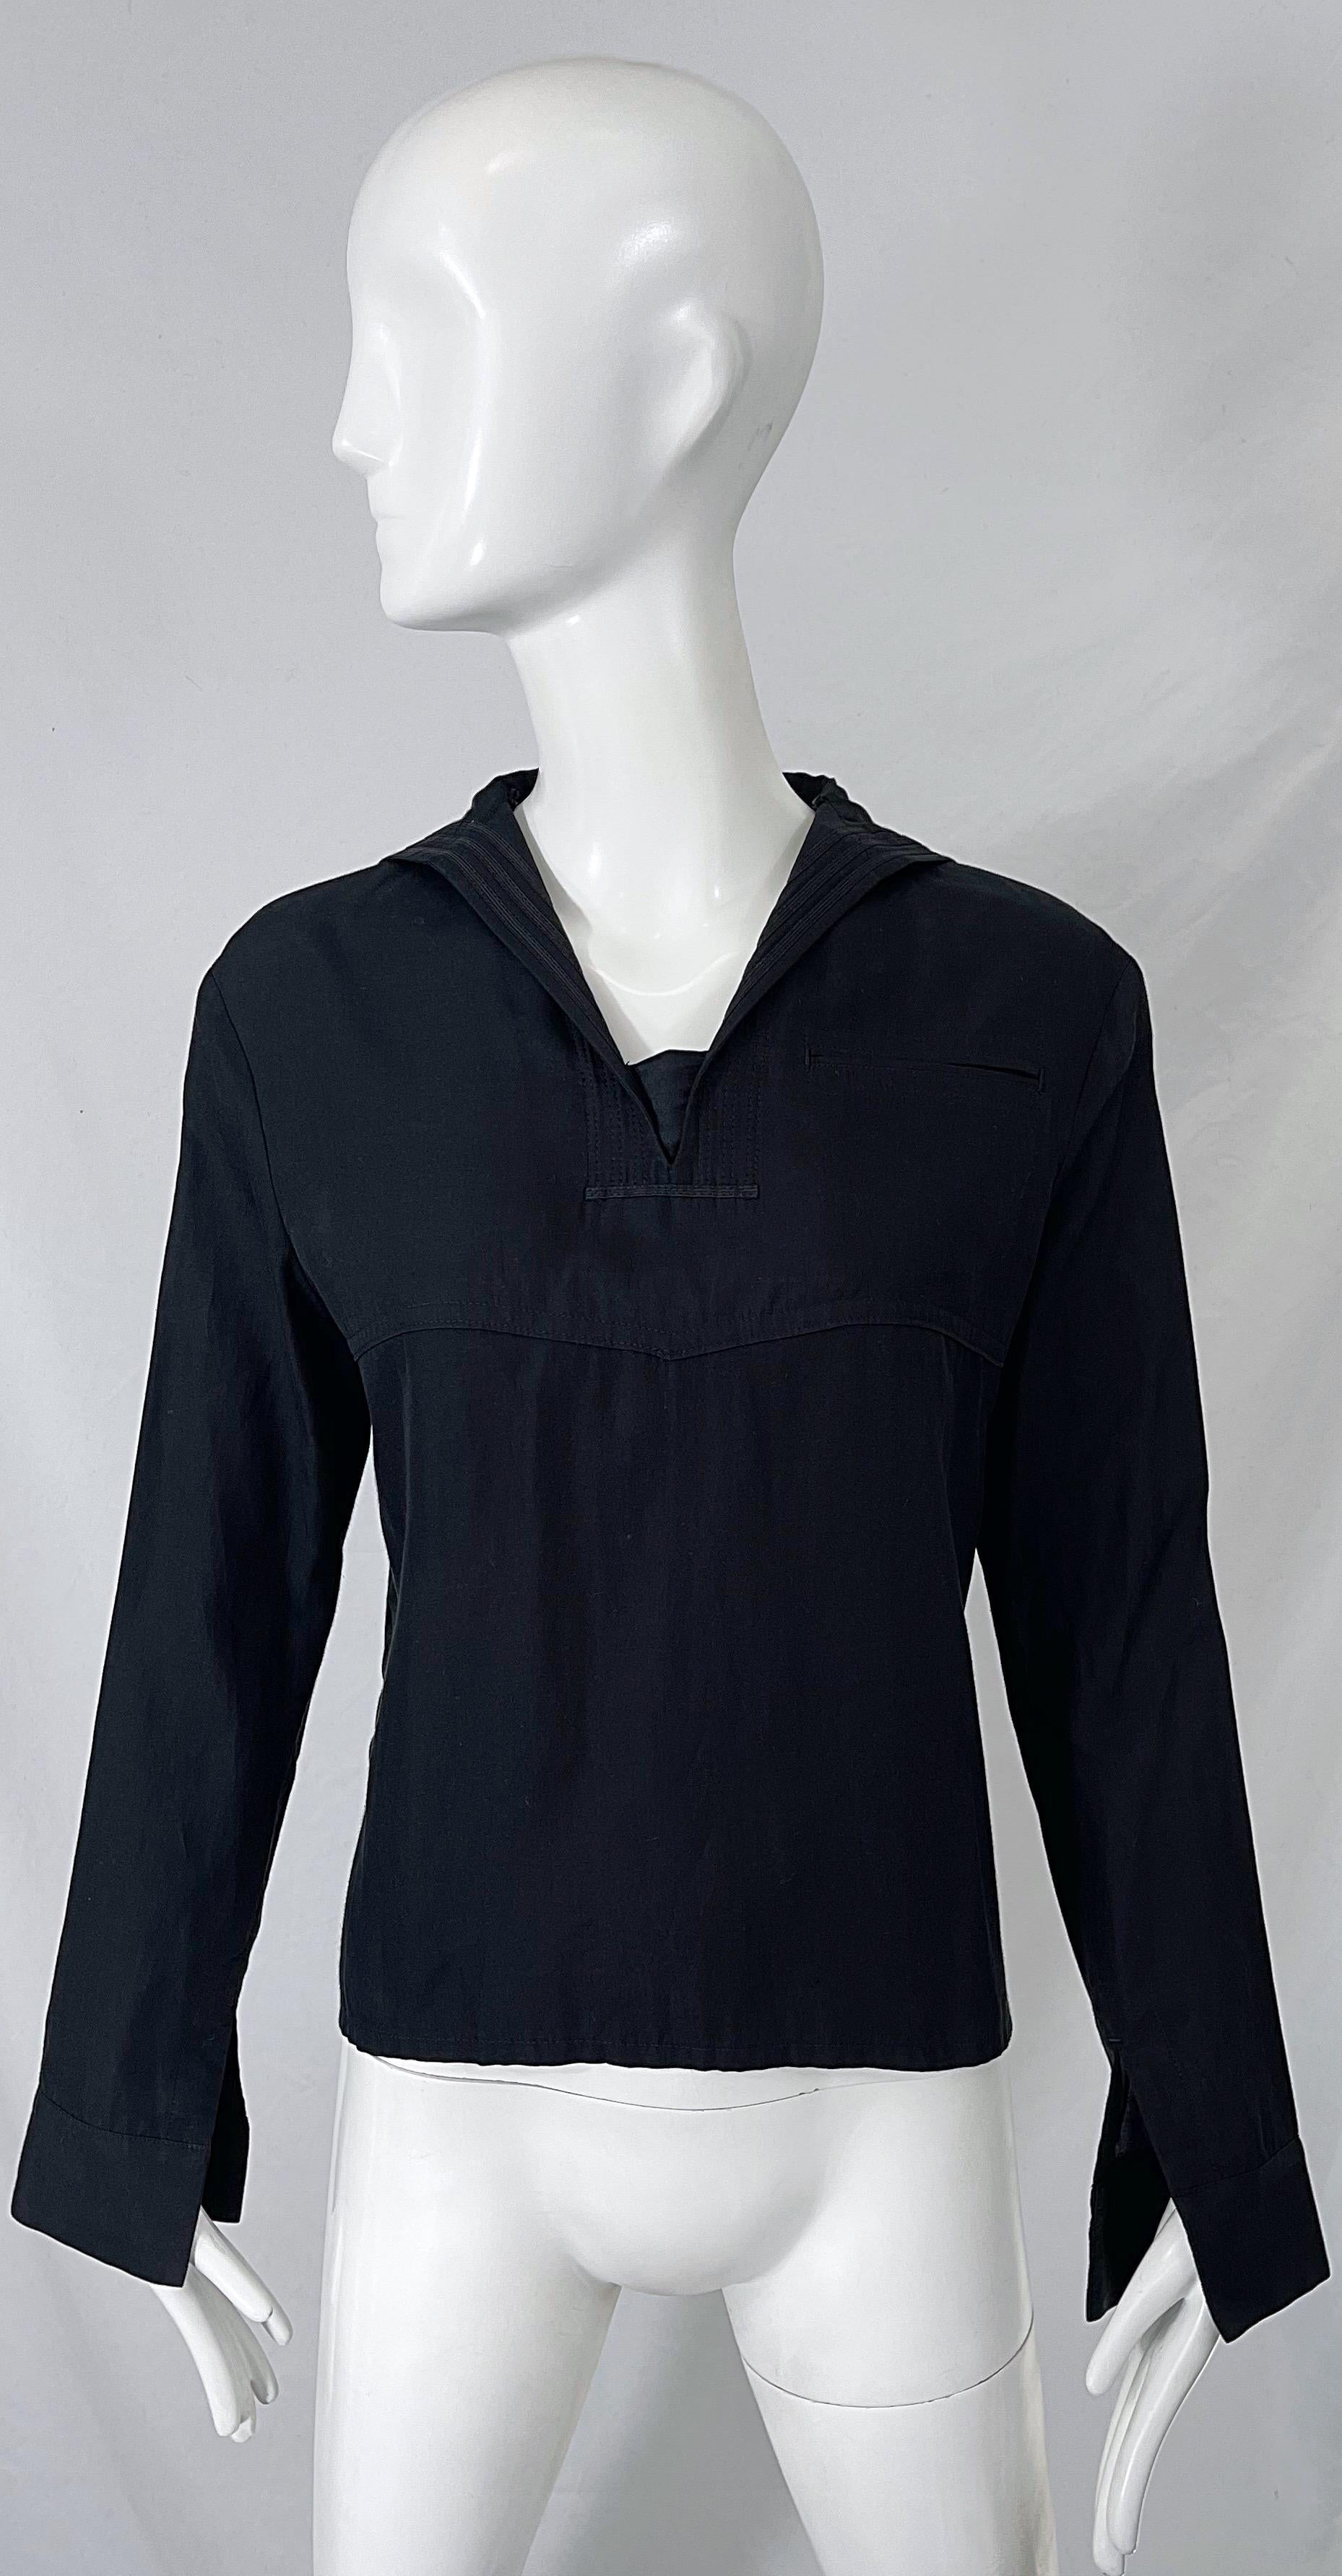 Awesome 90s YOHJI YAMAMOTO black silk and cotton nautical sailor shirt ! Features 55% silk and 45% cotton. Hidden zipper up the side. Can easily dress up or down. Pair with jeans, trousers, shorts or a skirt. 
In great condition
Made in Japan
Marked